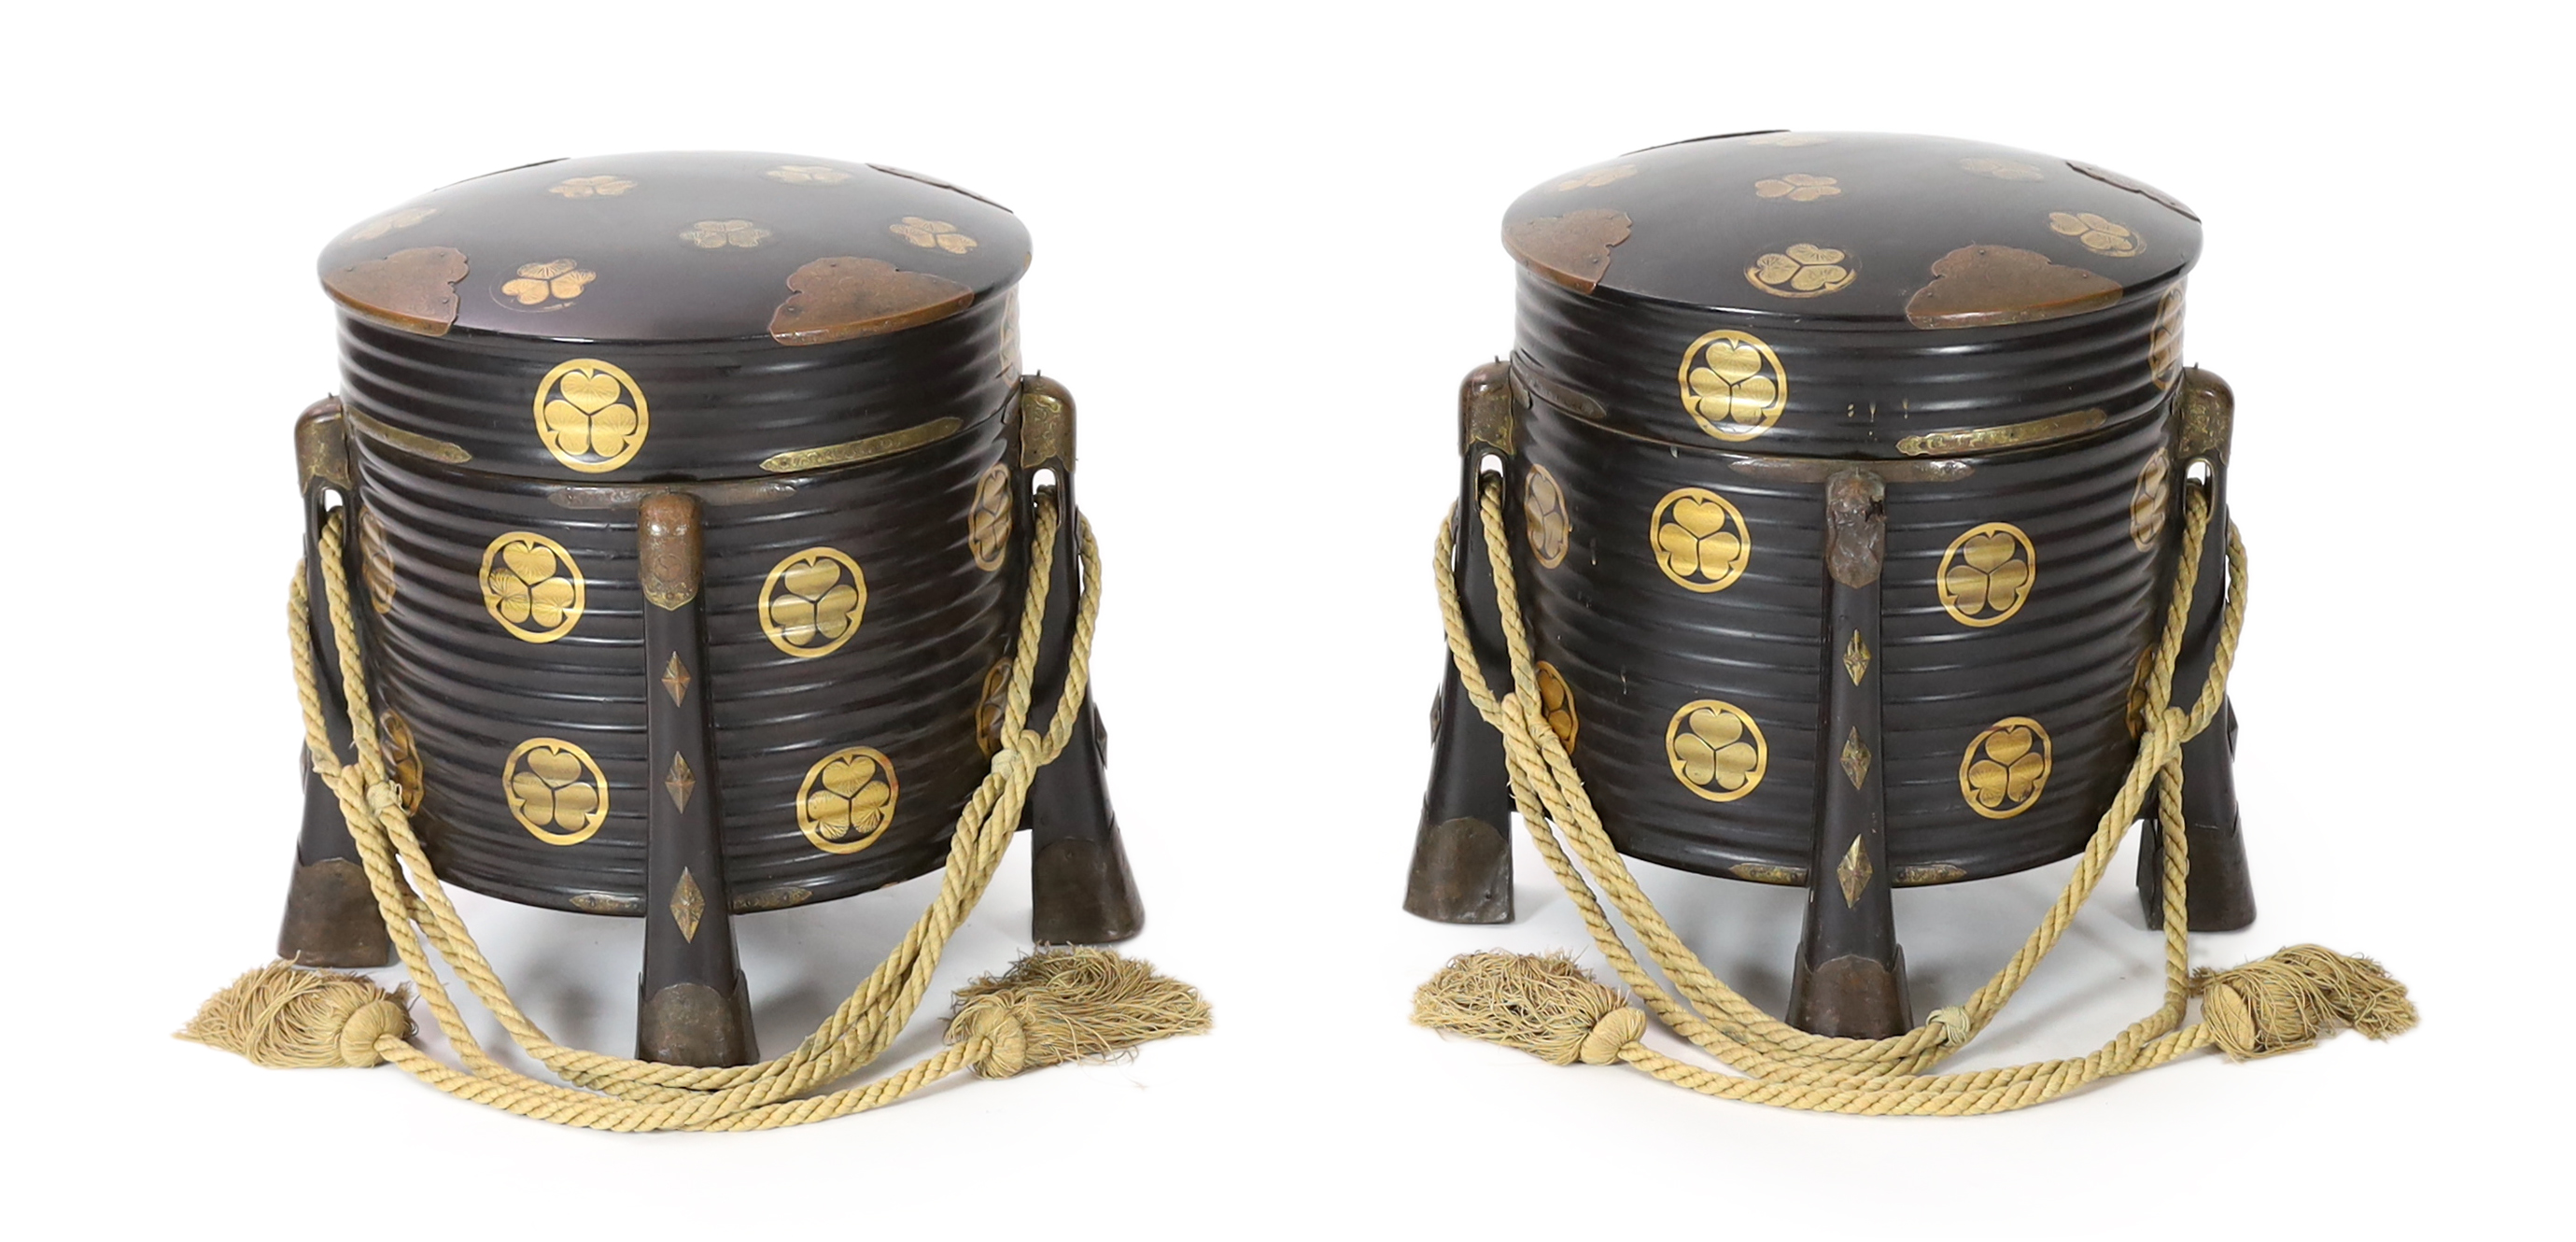 A pair of large Japanese black lacquer circular boxes and covers, Hokkai Bako, 19th century                                                                                                                                 